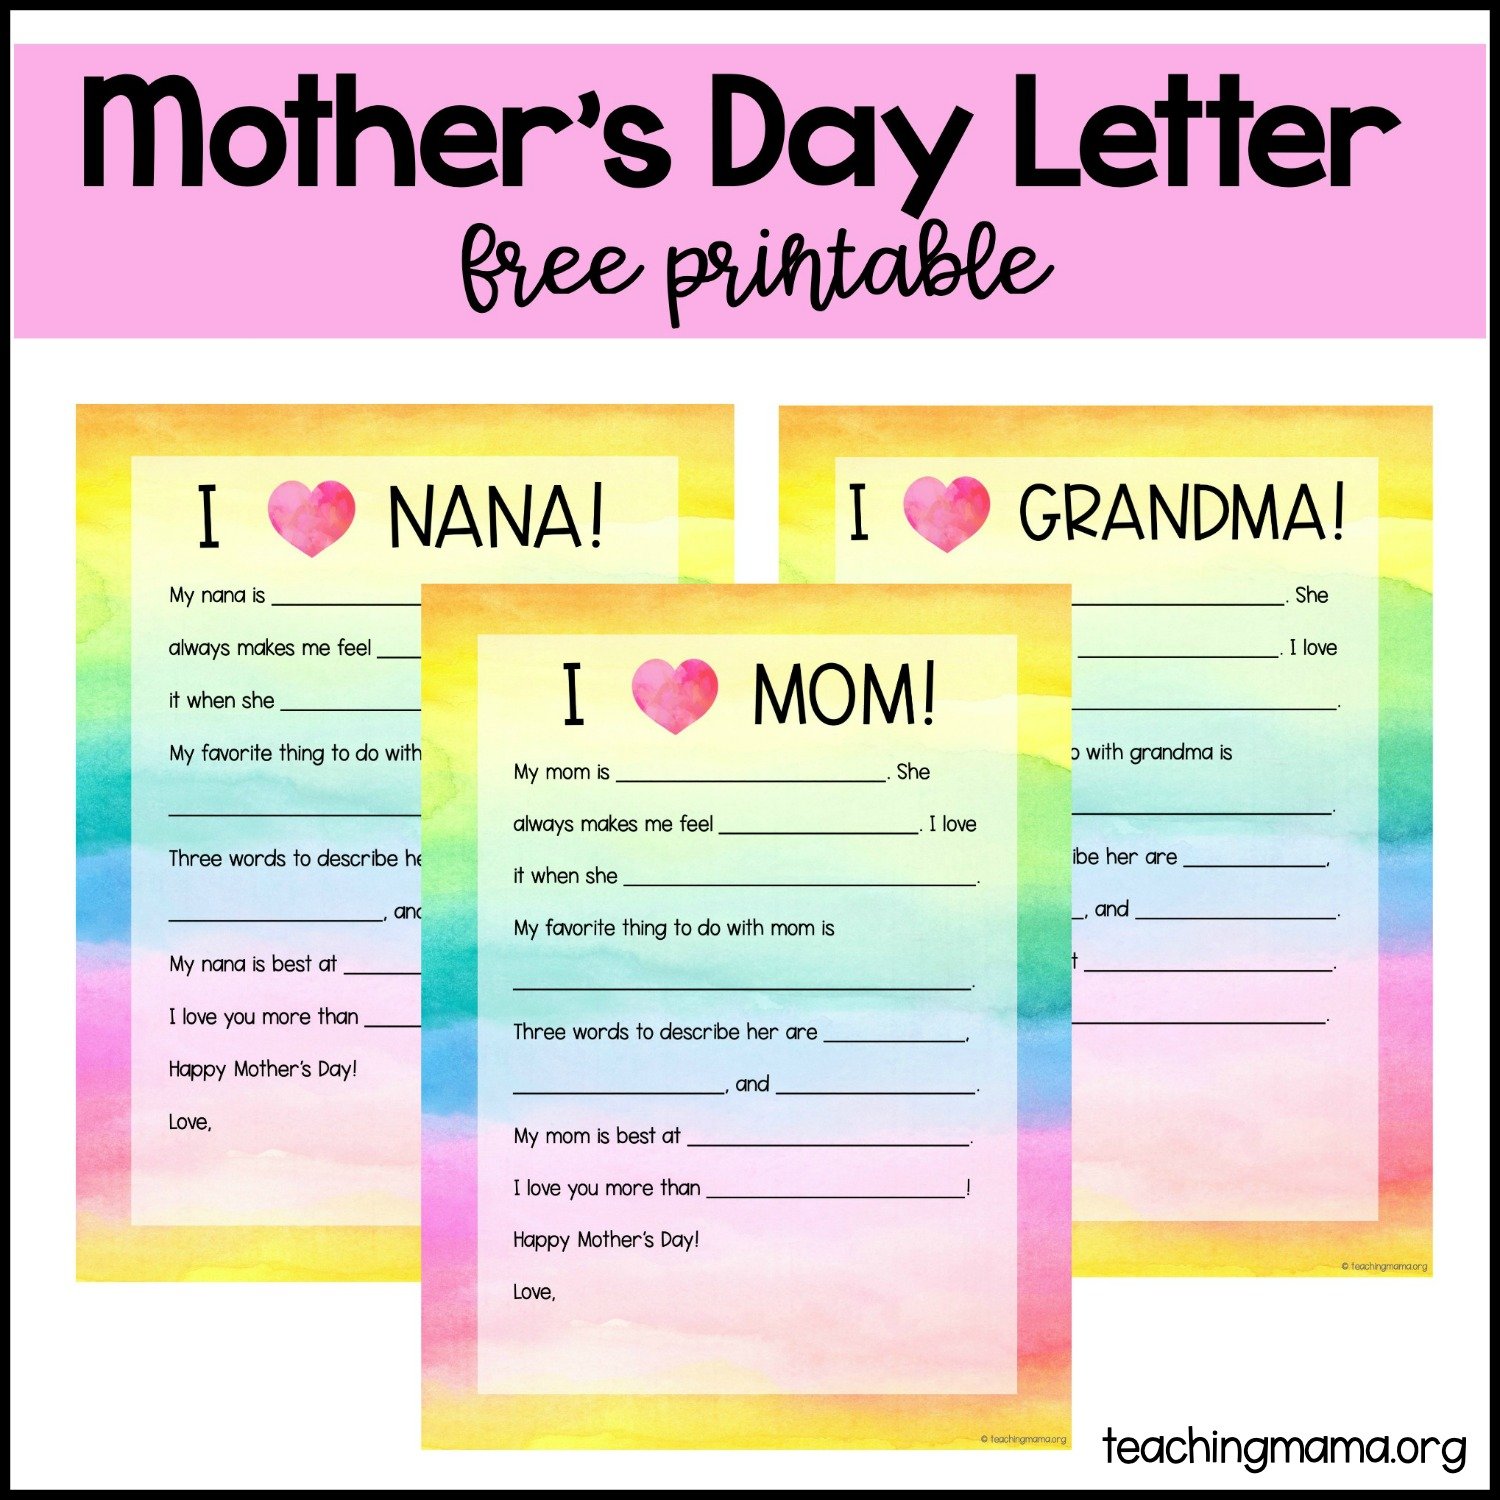 mother's day letter - free printable